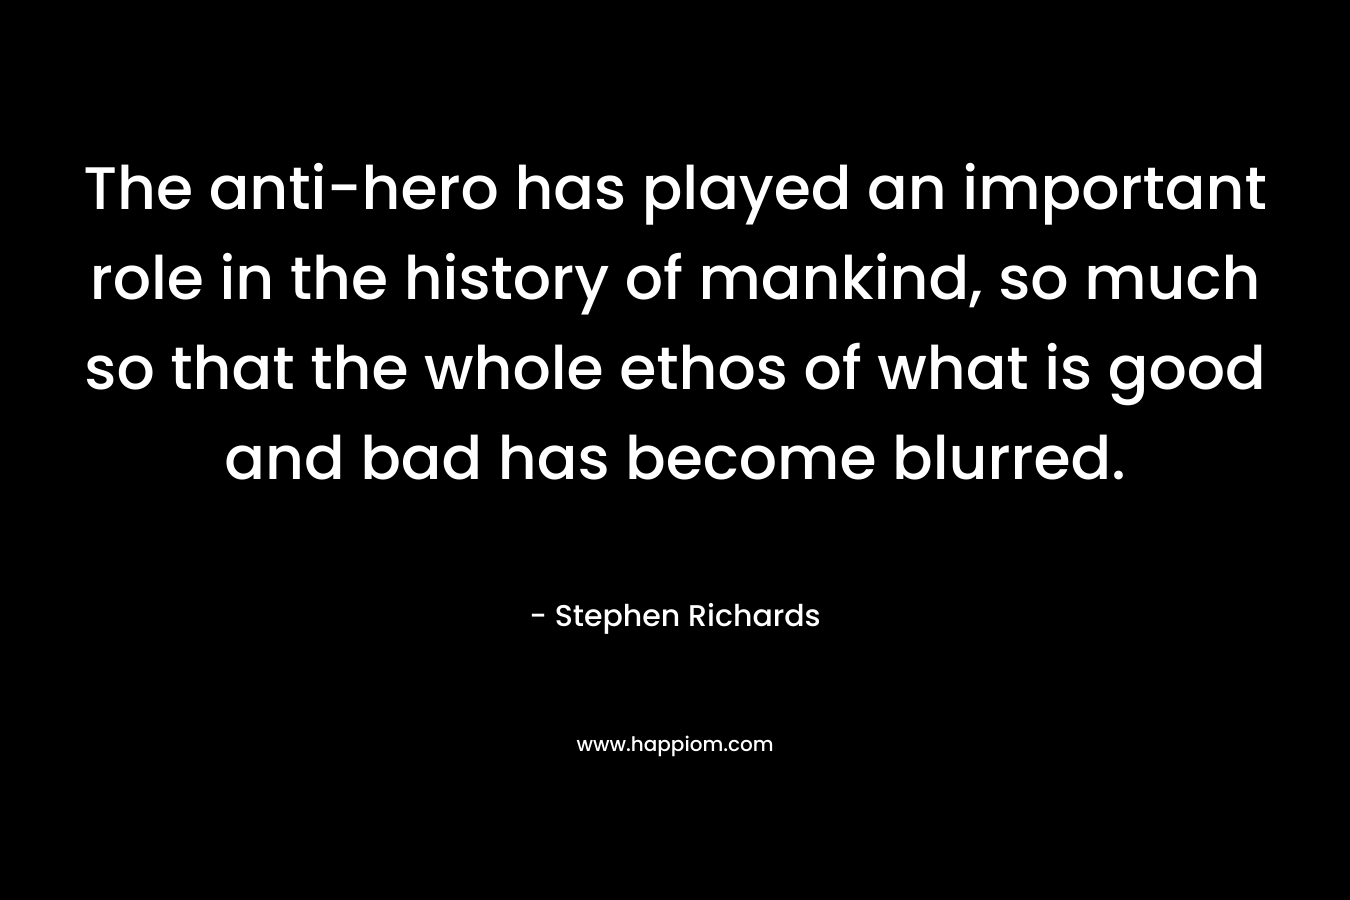 The anti-hero has played an important role in the history of mankind, so much so that the whole ethos of what is good and bad has become blurred.